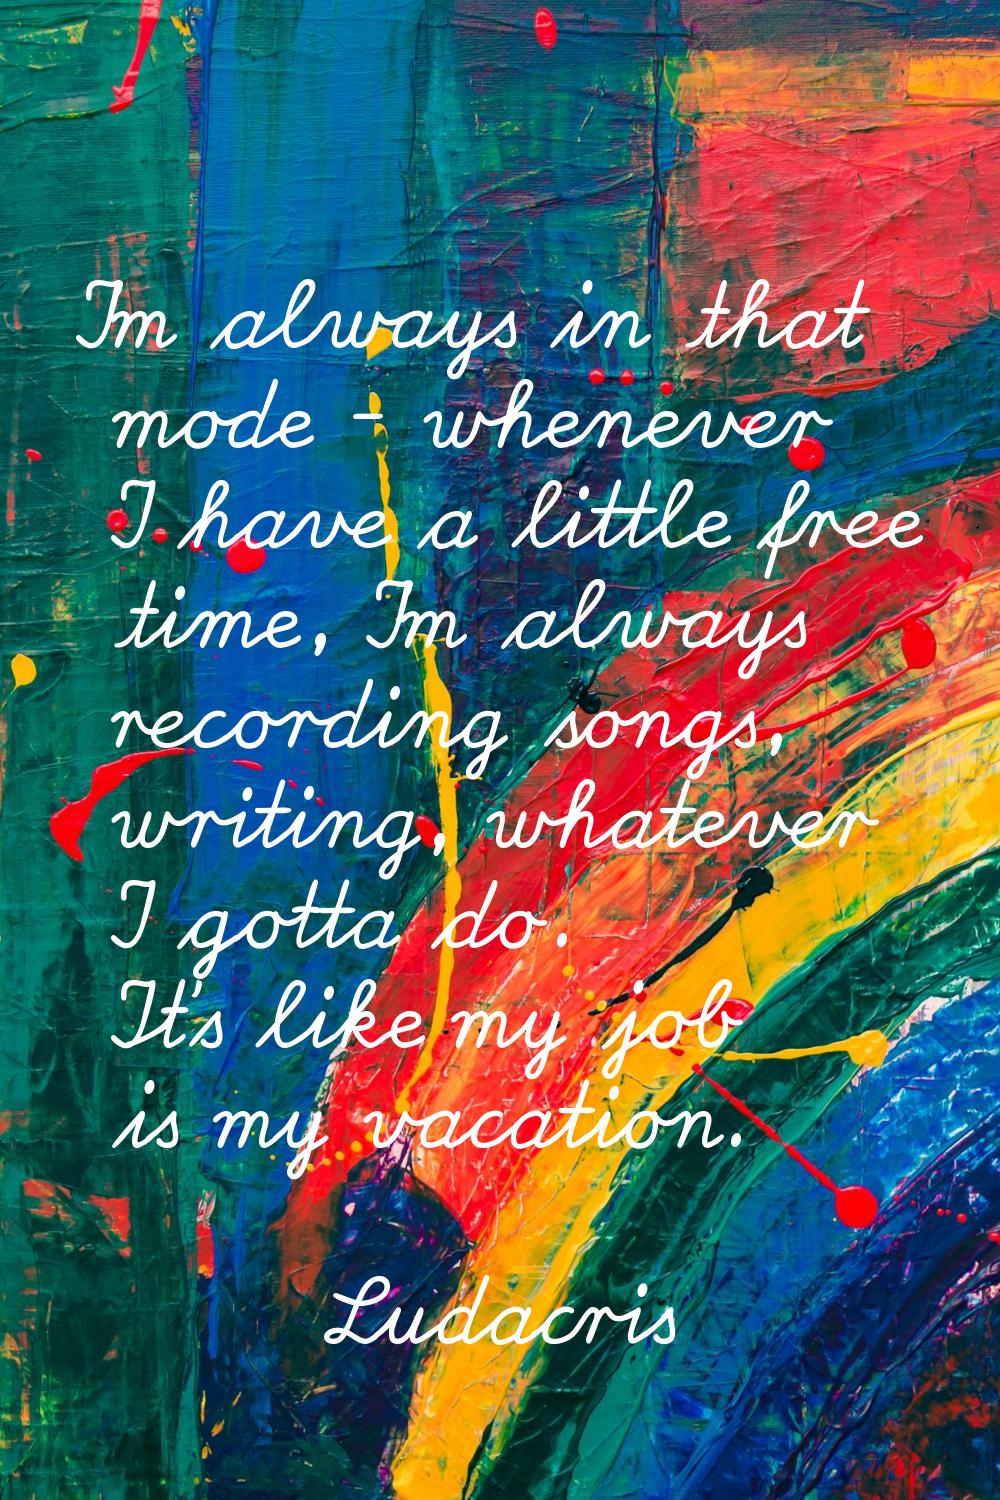 I'm always in that mode - whenever I have a little free time, I'm always recording songs, writing, 